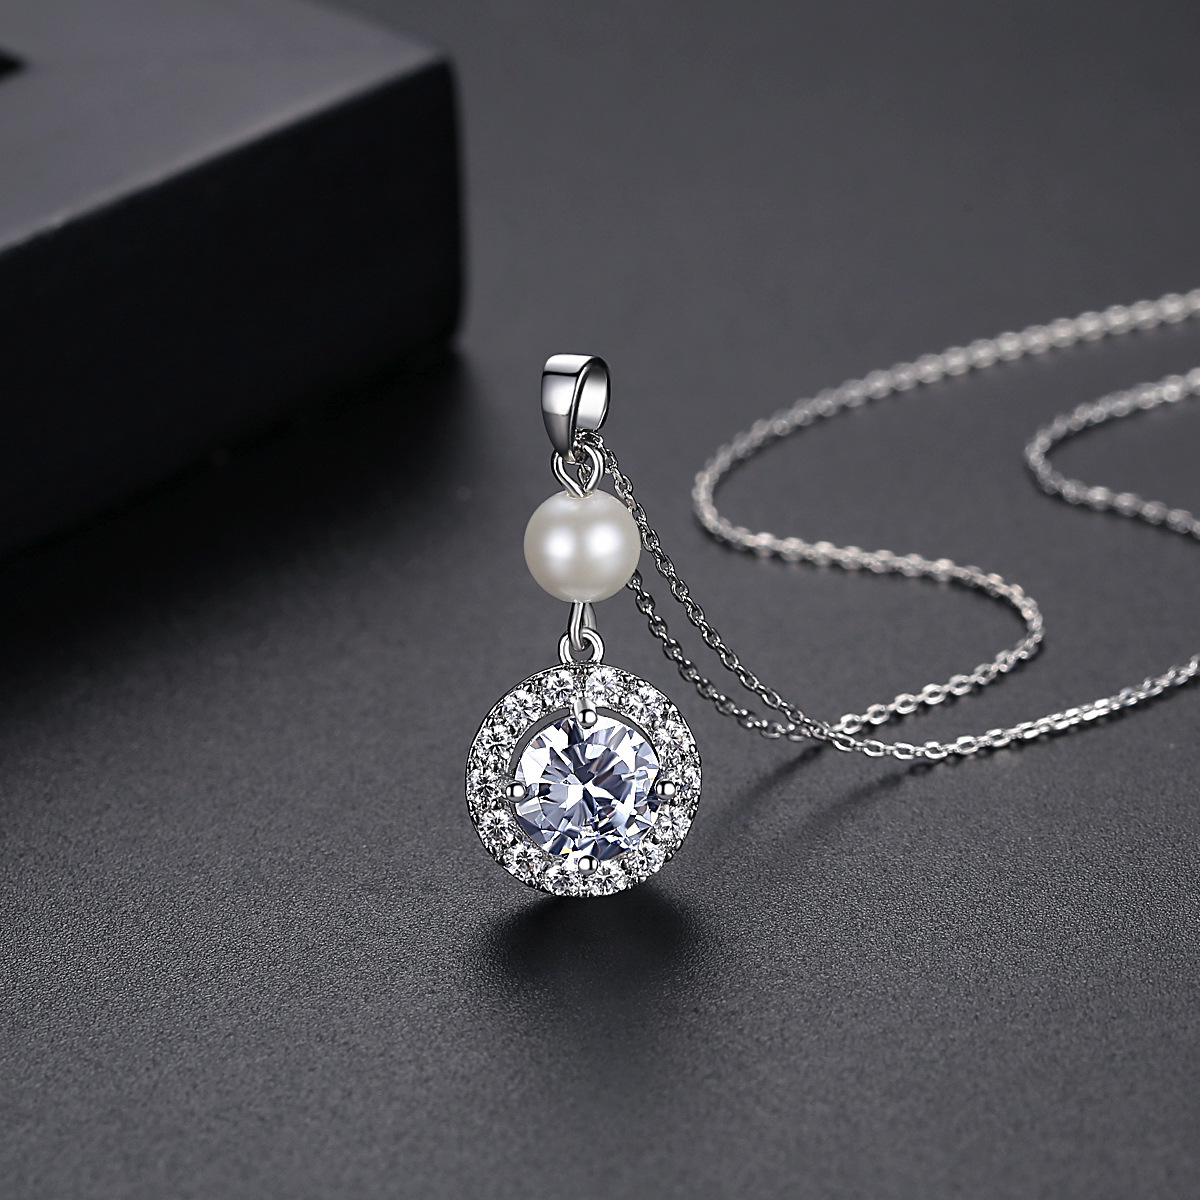 Simple minority pearl pendant round fashion necklace